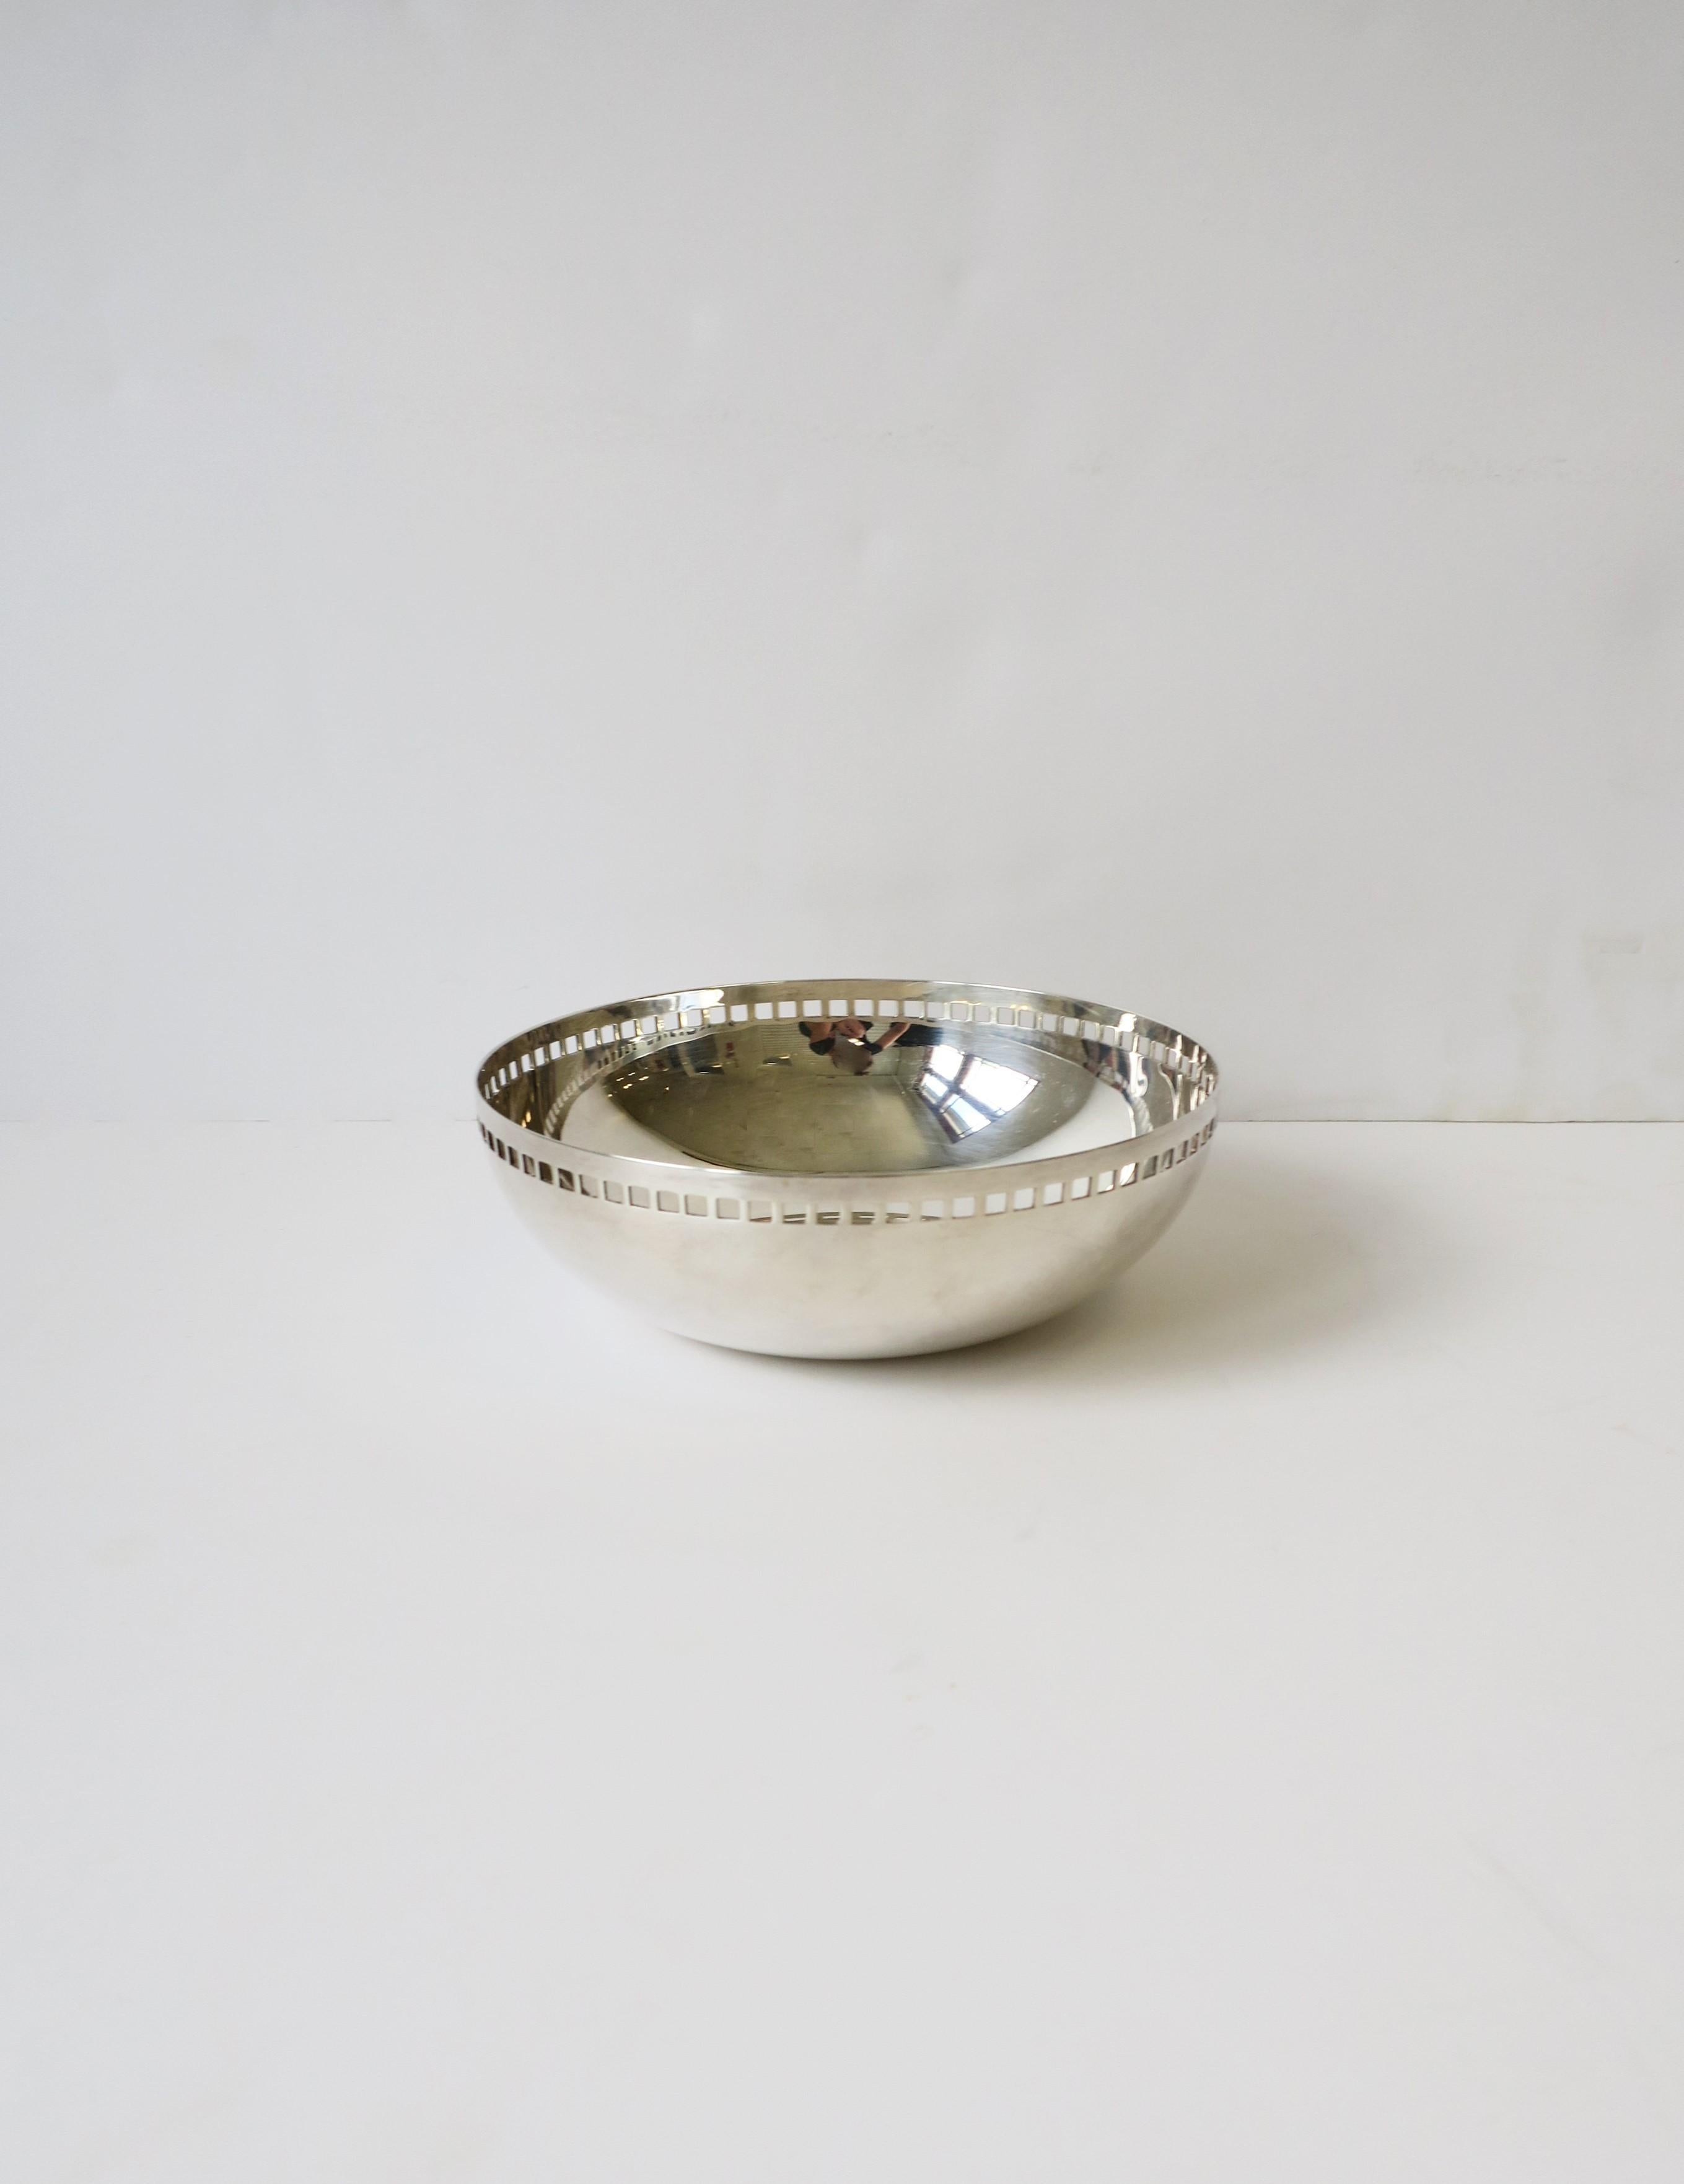 A designer Postmodern period sterling silver-plate bowl by American artist and architect Richard Meier for Swid Powell Co., made in Italy, 1992. Piece is formally known as the 